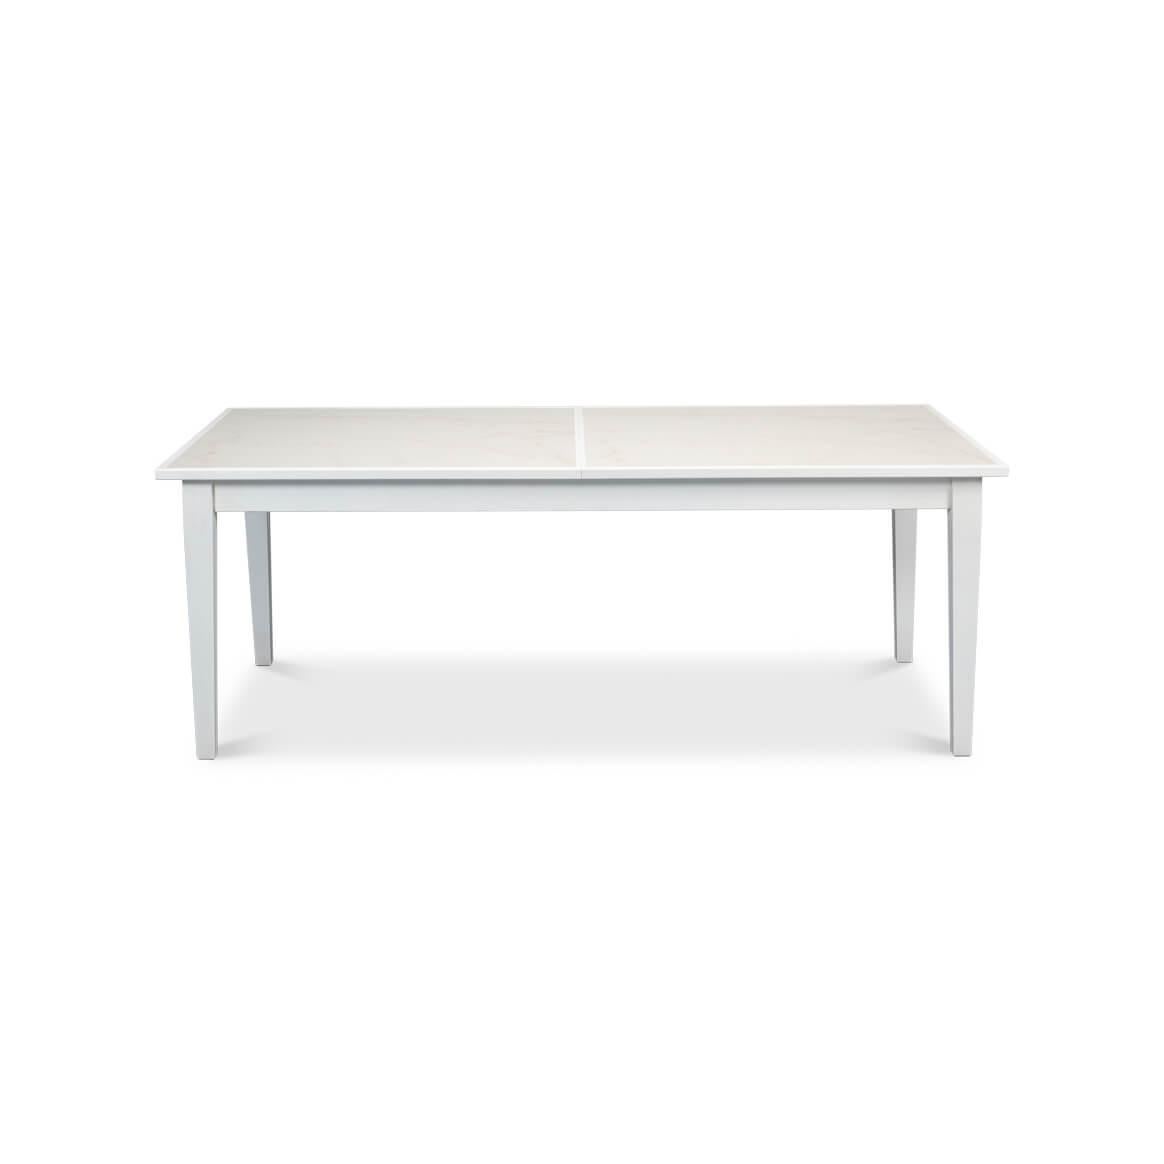 With dimensions starting at 81 inches wide by 41 inches deep and expanding up to 120 inches wide, all while standing at a height of 30 inches, this table is the epitome of versatility and modern elegance.

Its ability to transition in size makes it